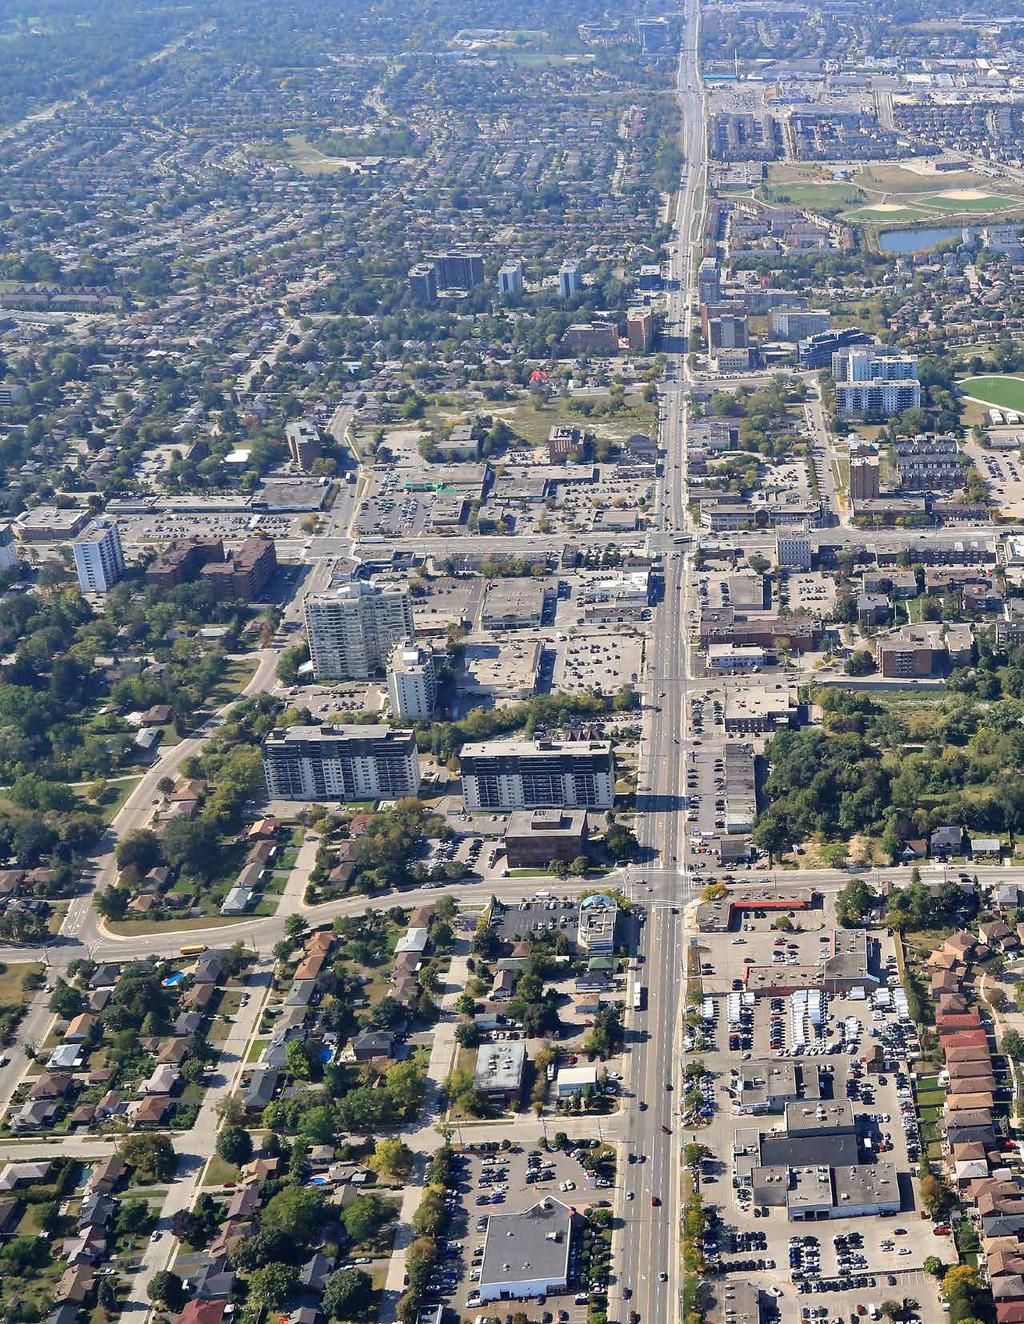 The Site benefits from its proximity to major 00-series highway, Queen Elizabeth Way and major arterial roads such as Dundas Street East and Hurontario Street, both of which are significant eastwest